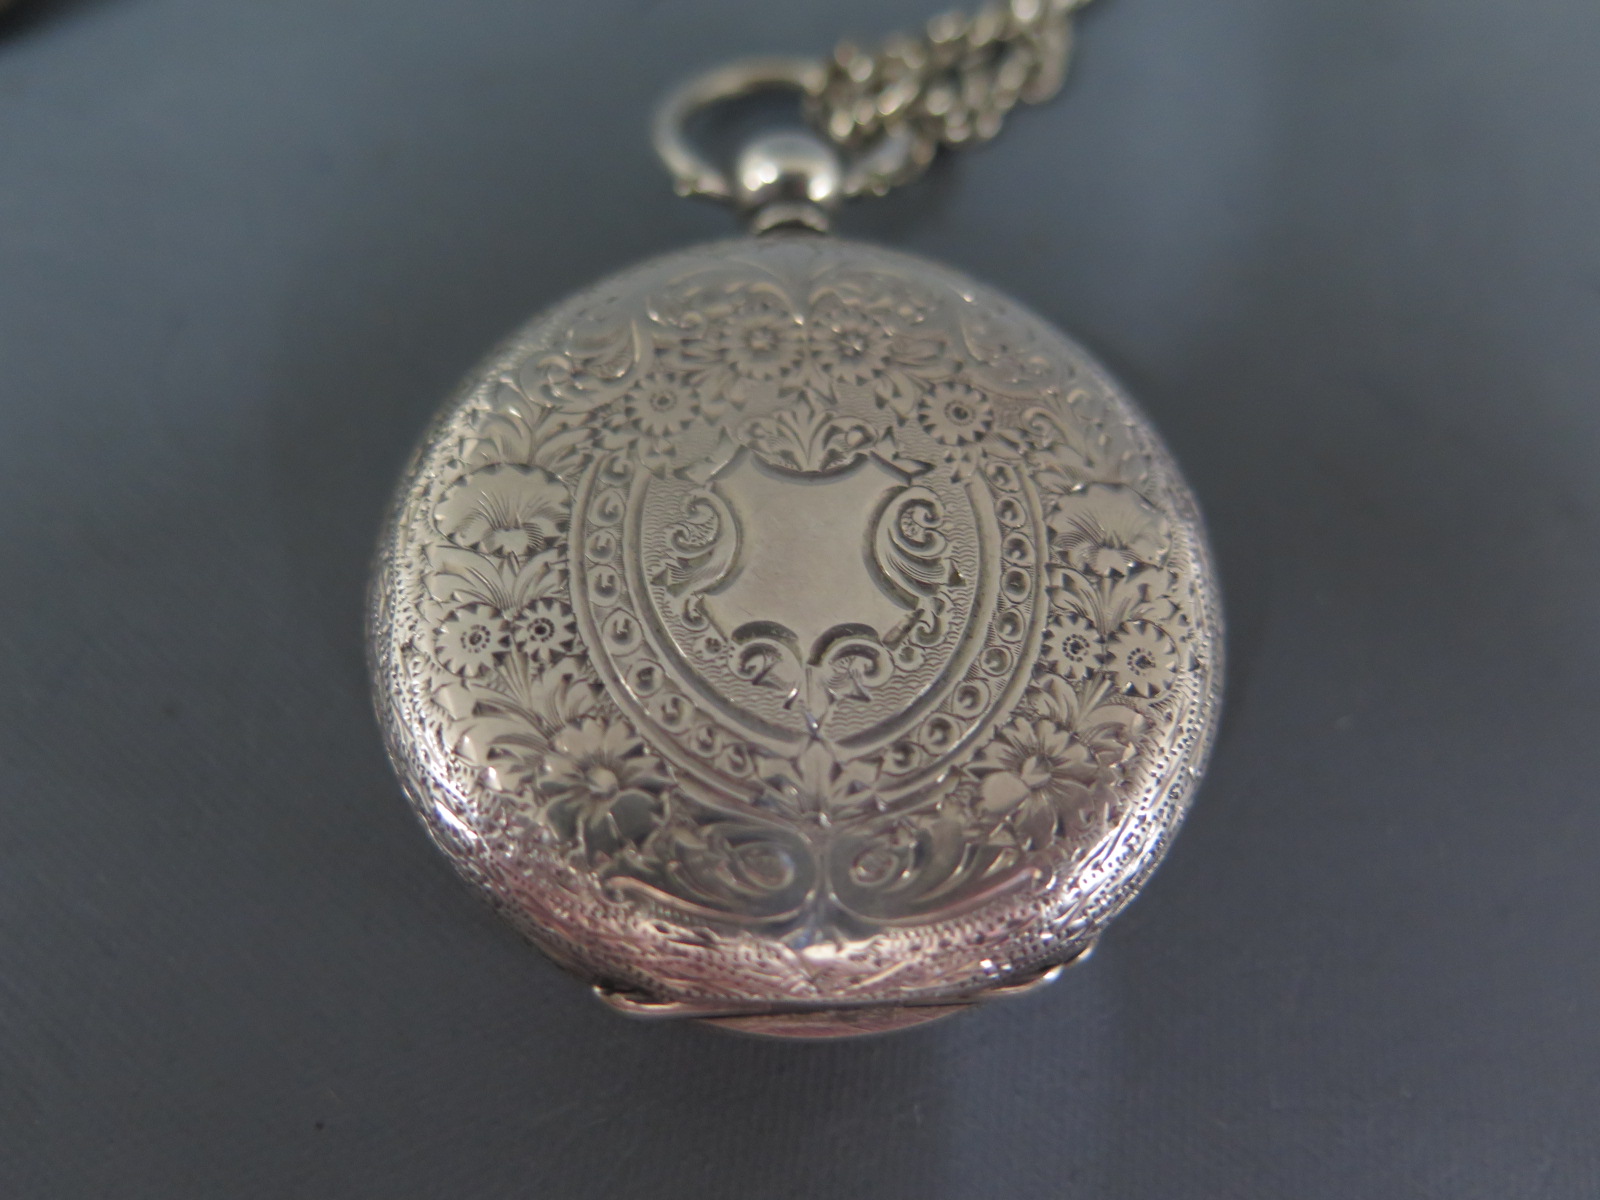 A silver pocket watch Eustace Durran with a chain and a brass pencil - working, - Image 3 of 3